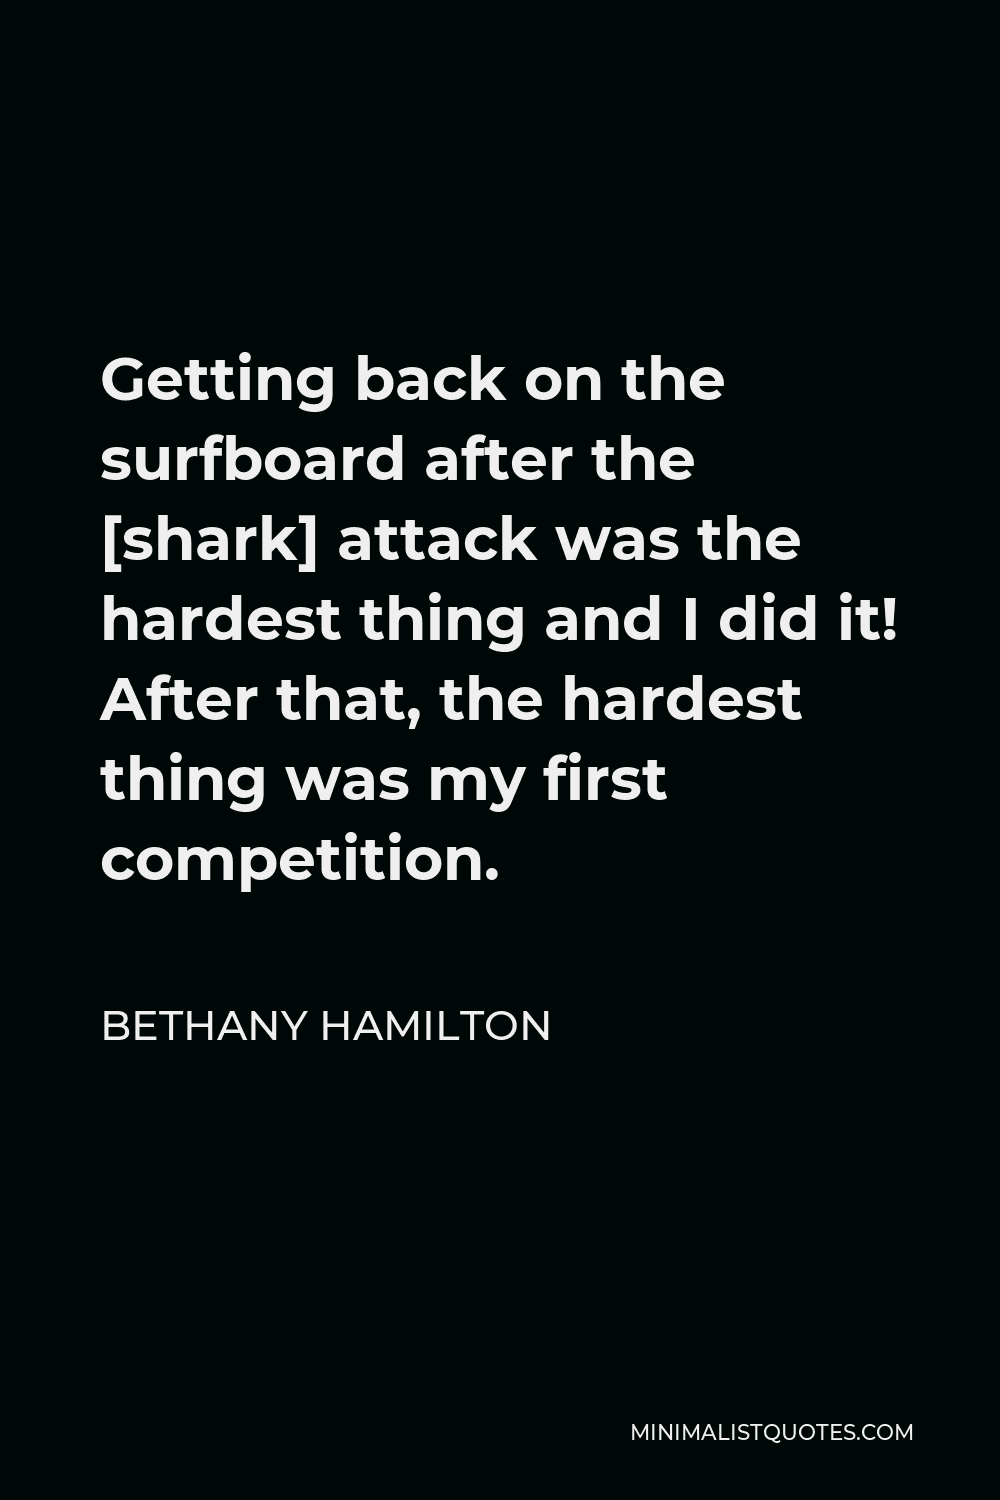 Bethany Hamilton Quote - Getting back on the surfboard after the [shark] attack was the hardest thing and I did it! After that, the hardest thing was my first competition.